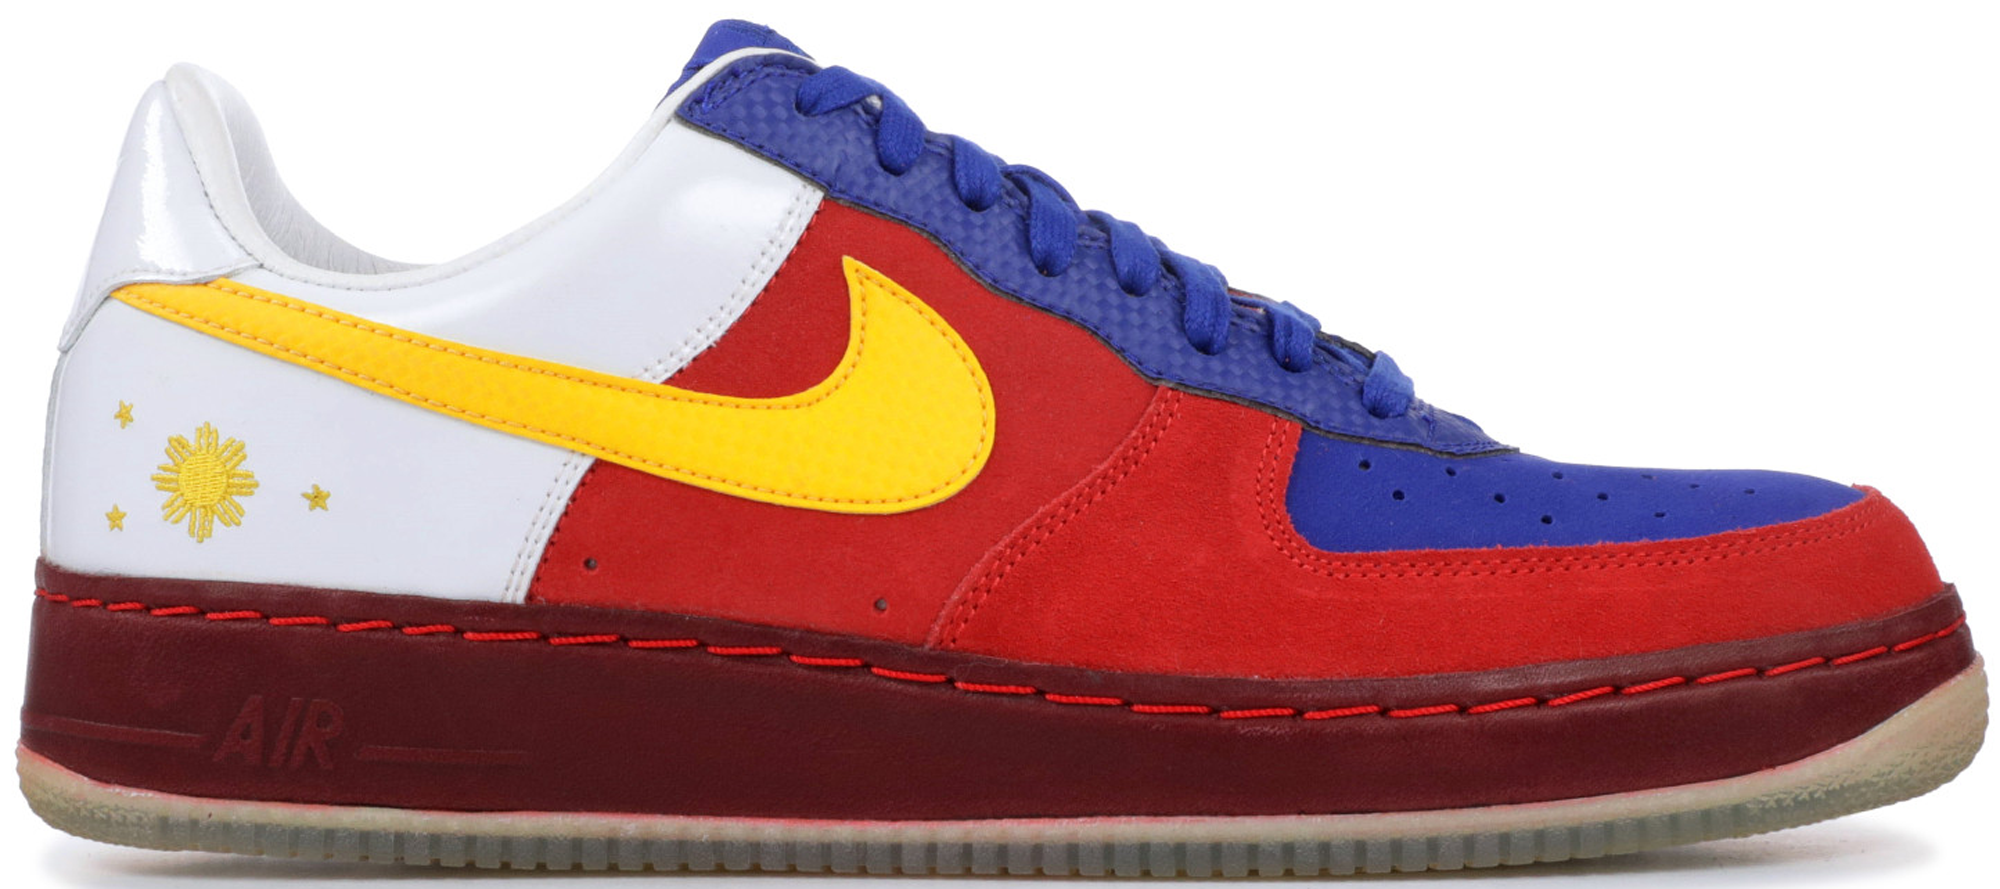 Nike Air Force 1 Insideout Philippines 